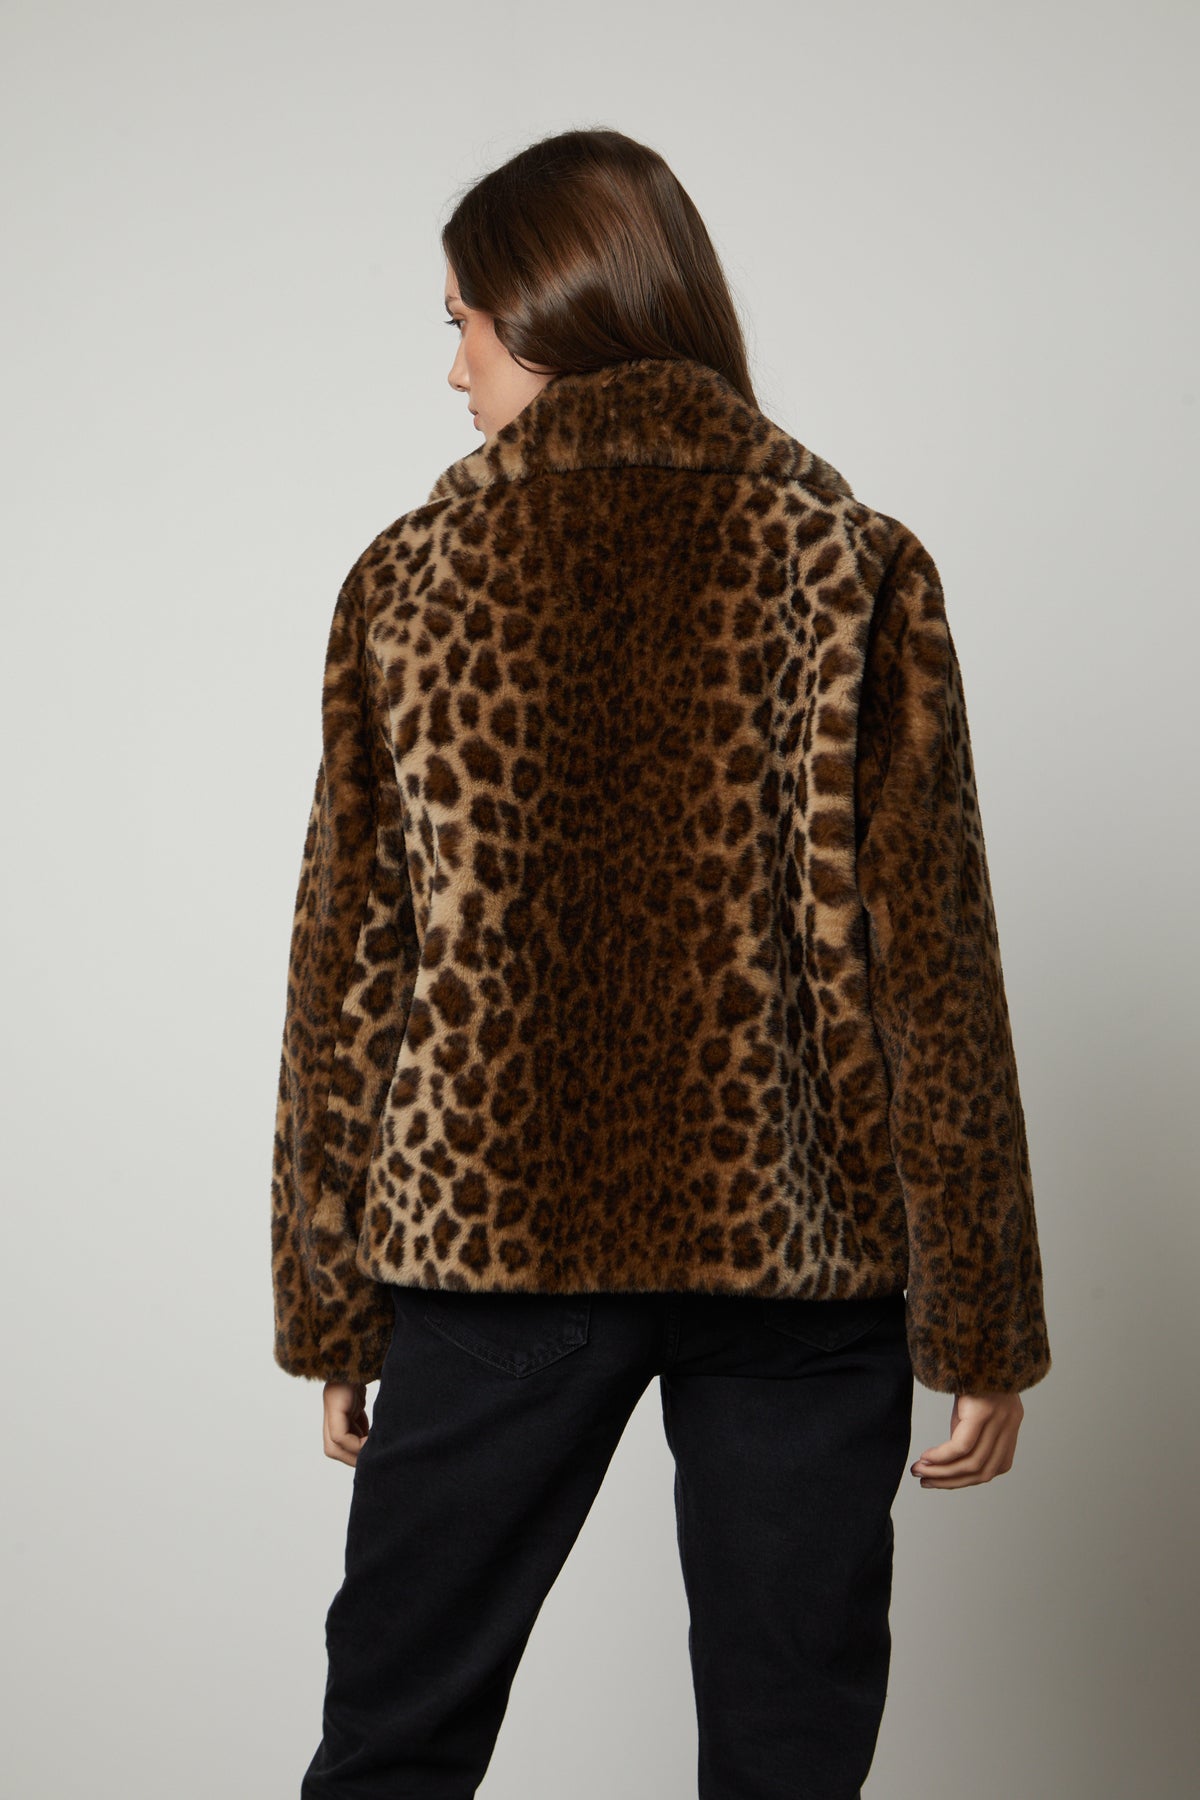 The back view of a woman wearing a Velvet by Graham & Spencer AMANI LEOPARD LUX FAUX FUR JACKET.-26897679220929